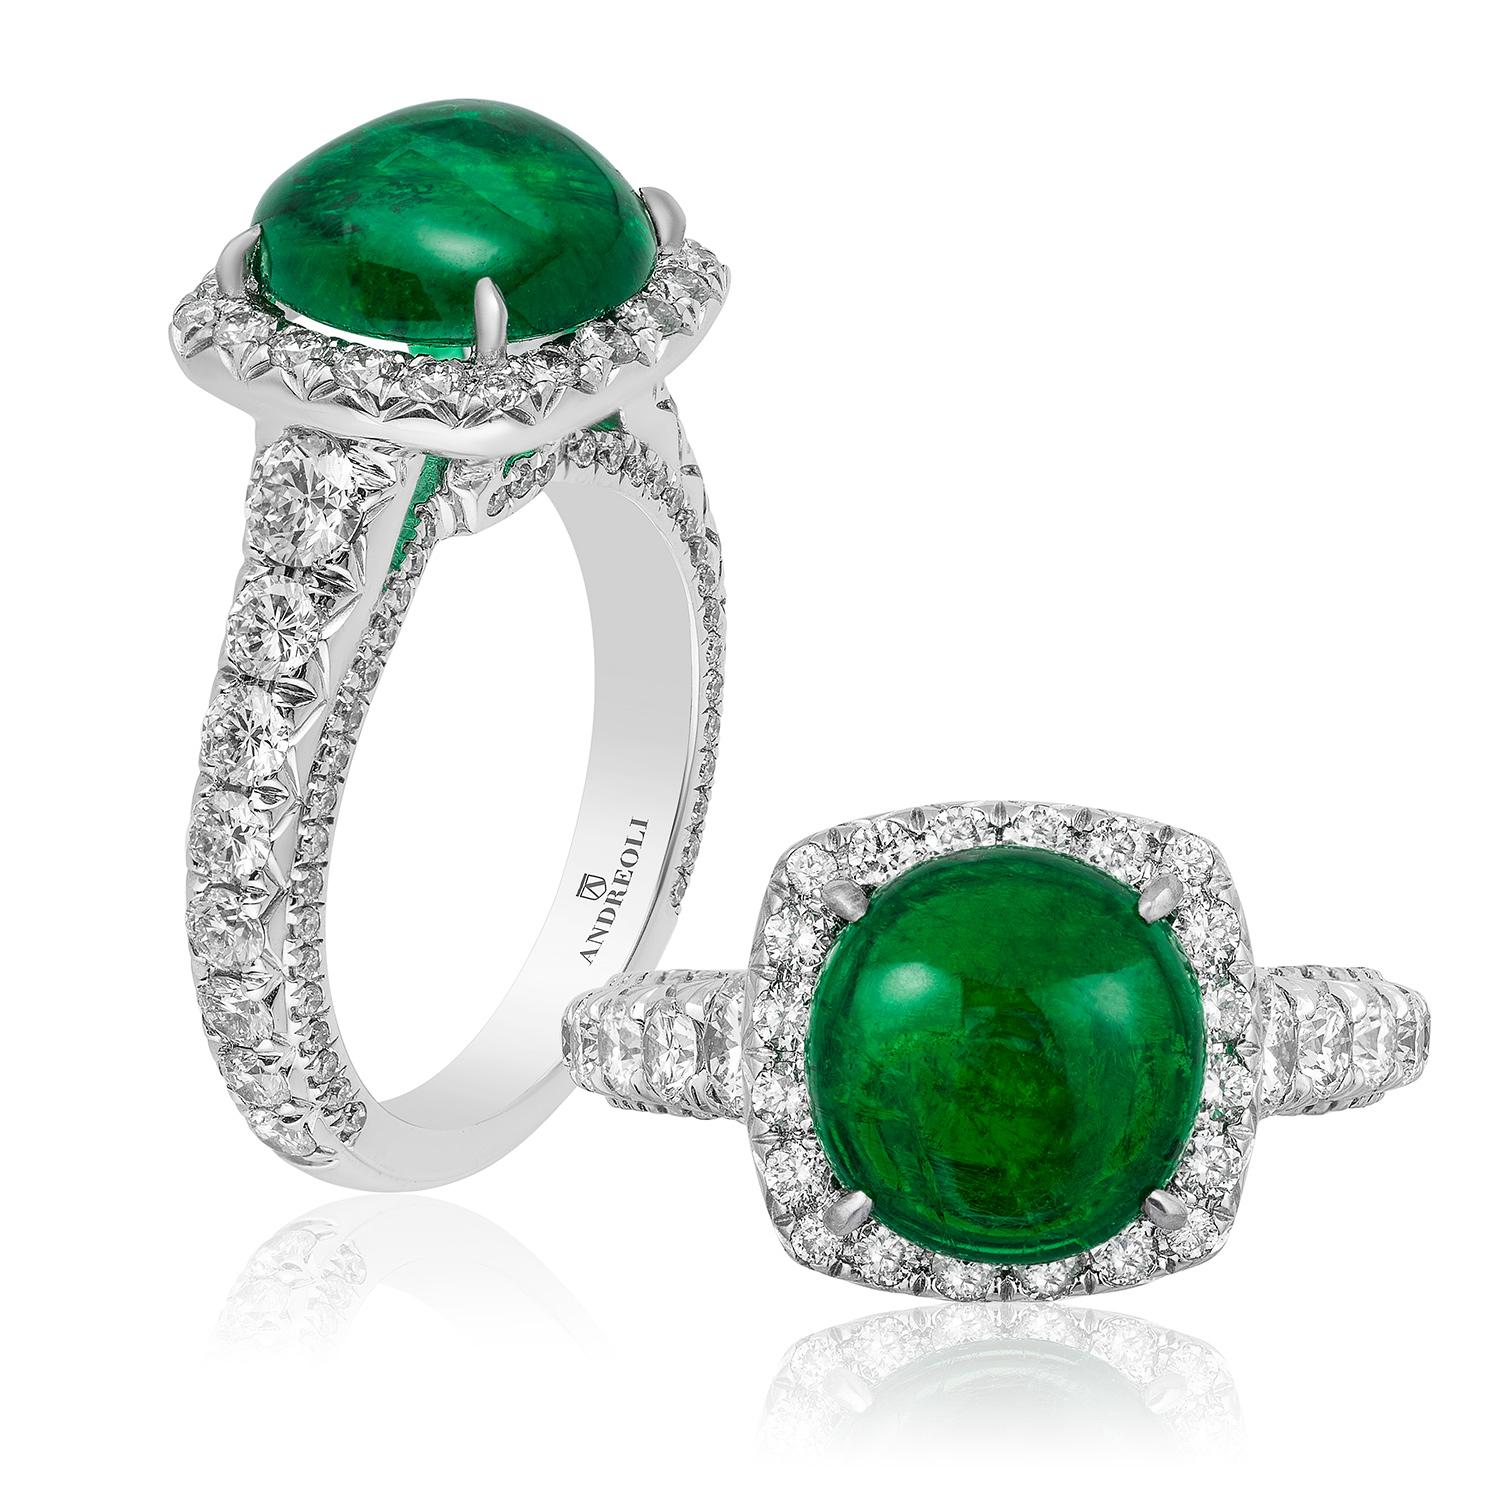 Contemporary Andreoli 3.50 Carat Emerald Diamond 18 Karat White Gold Ring CDC Certified For Sale